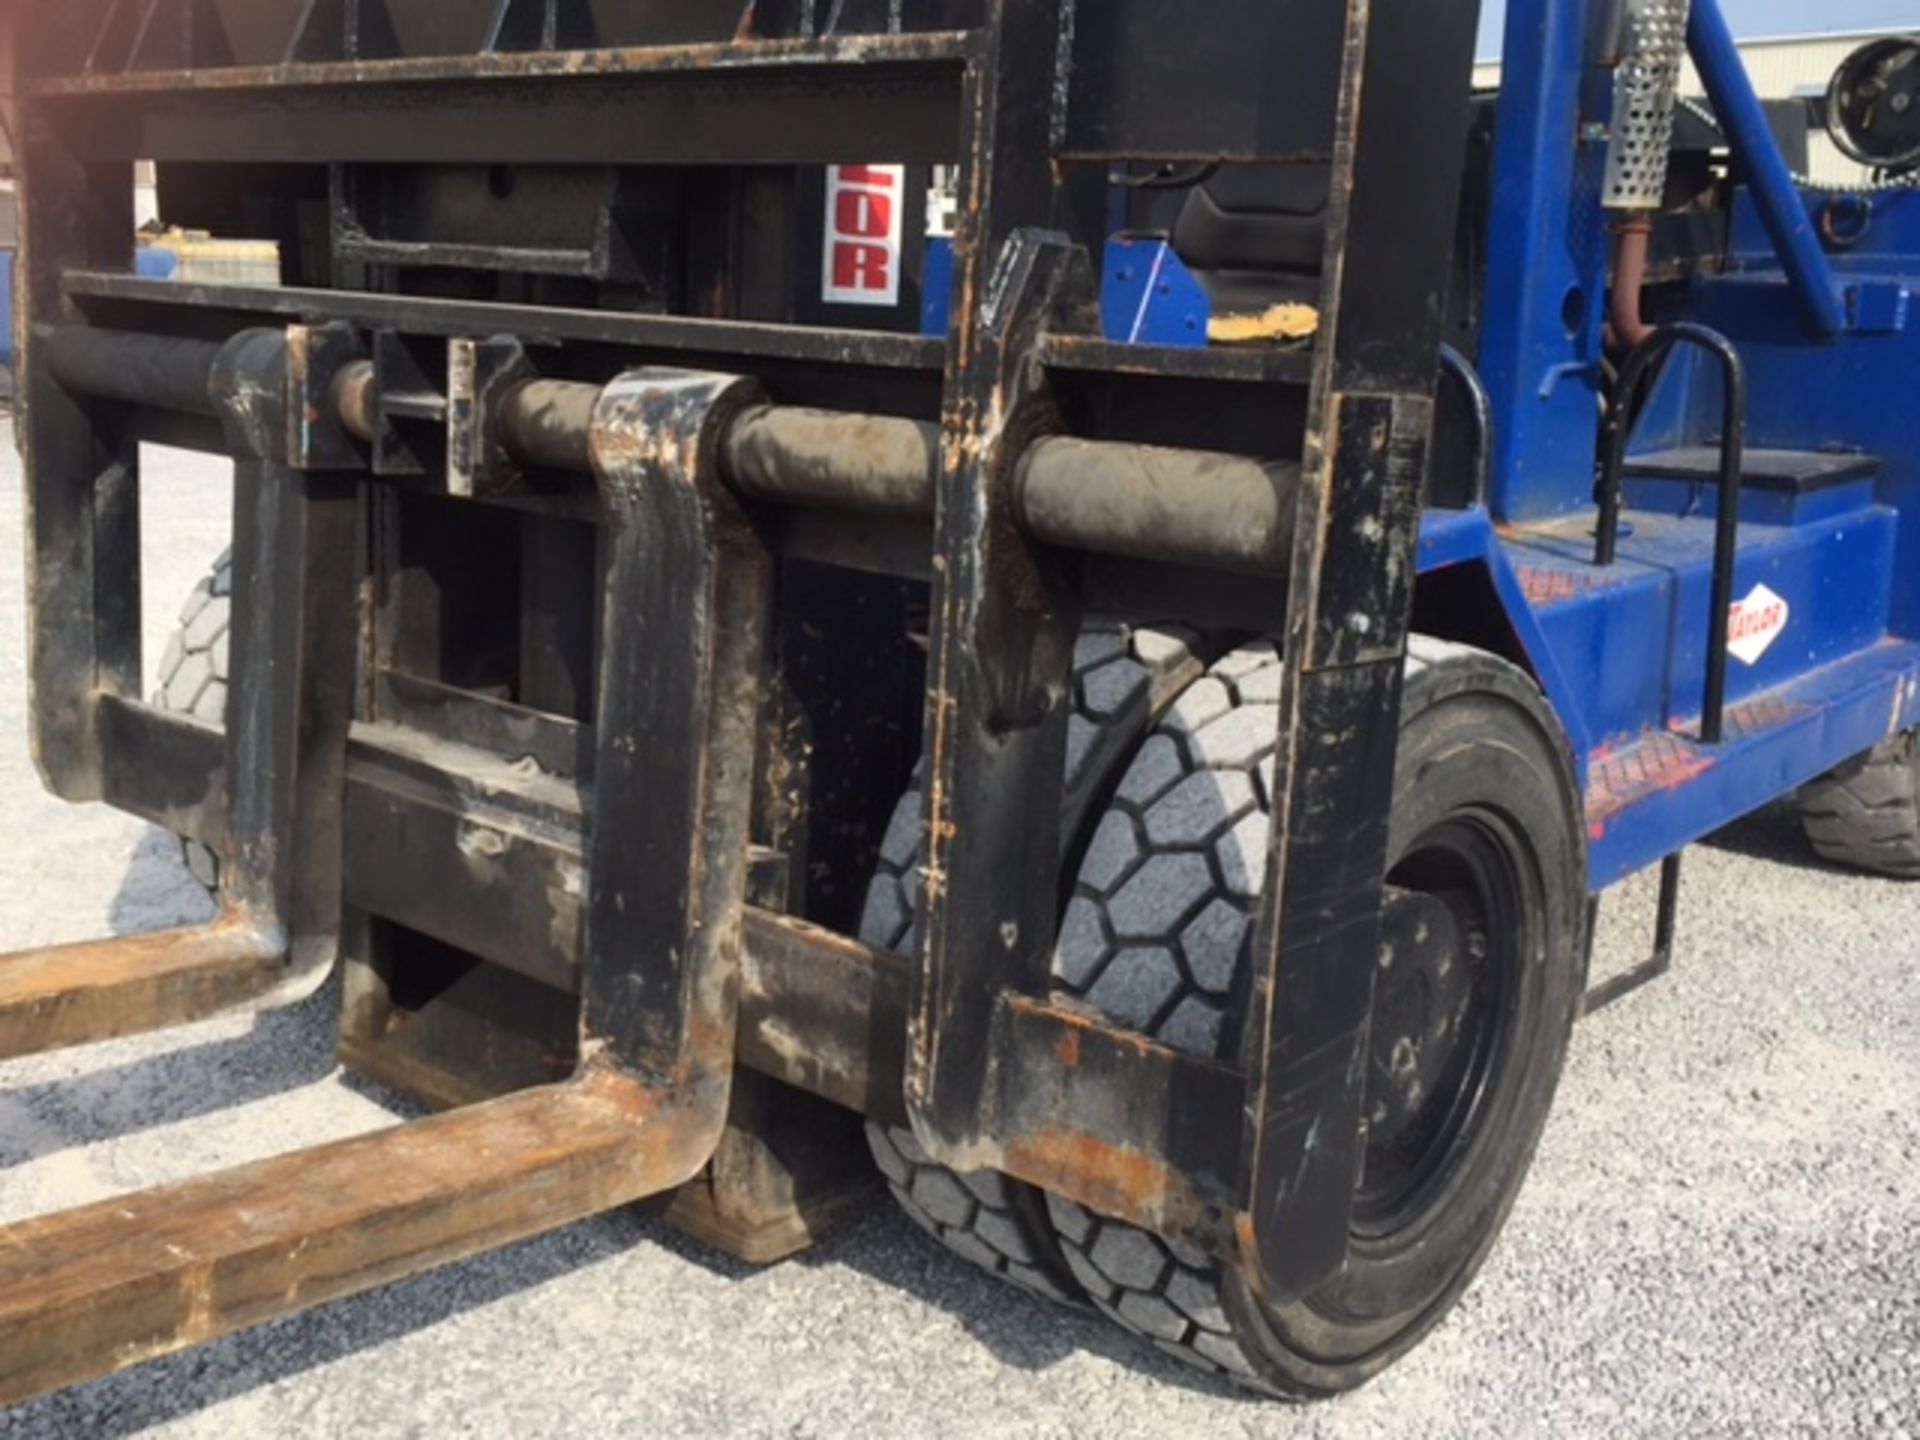 Taylor 40,000LB Forklift, LP Gas, 9' Lift, Cushion Tire, 351 Cleveland Ford Engine - Image 4 of 6